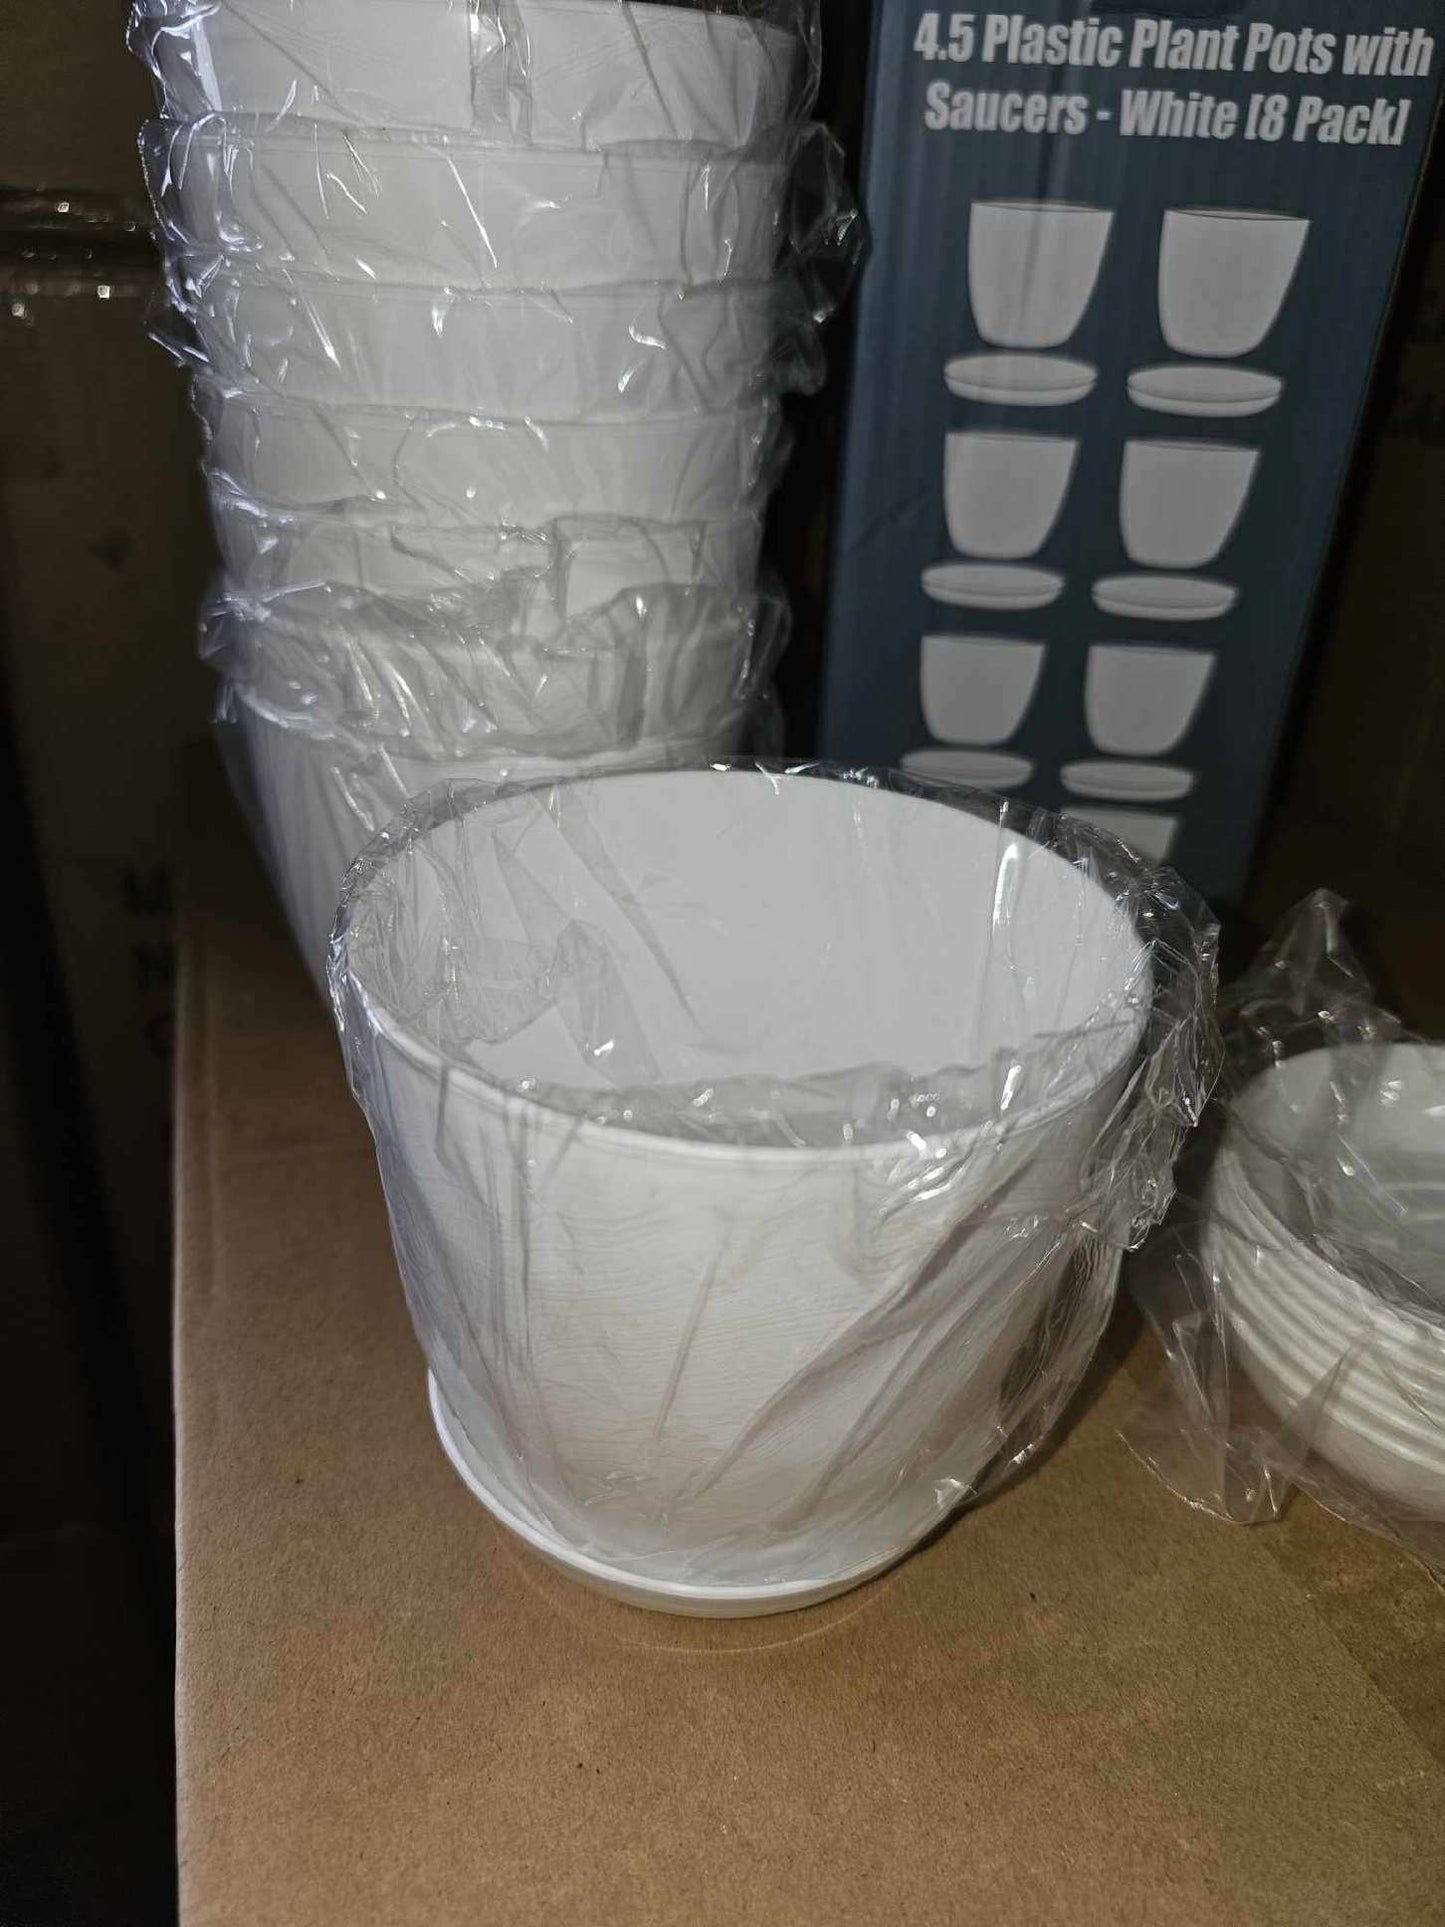 8 Pack 4.5" Plastic Plant Pots with Saucers - White